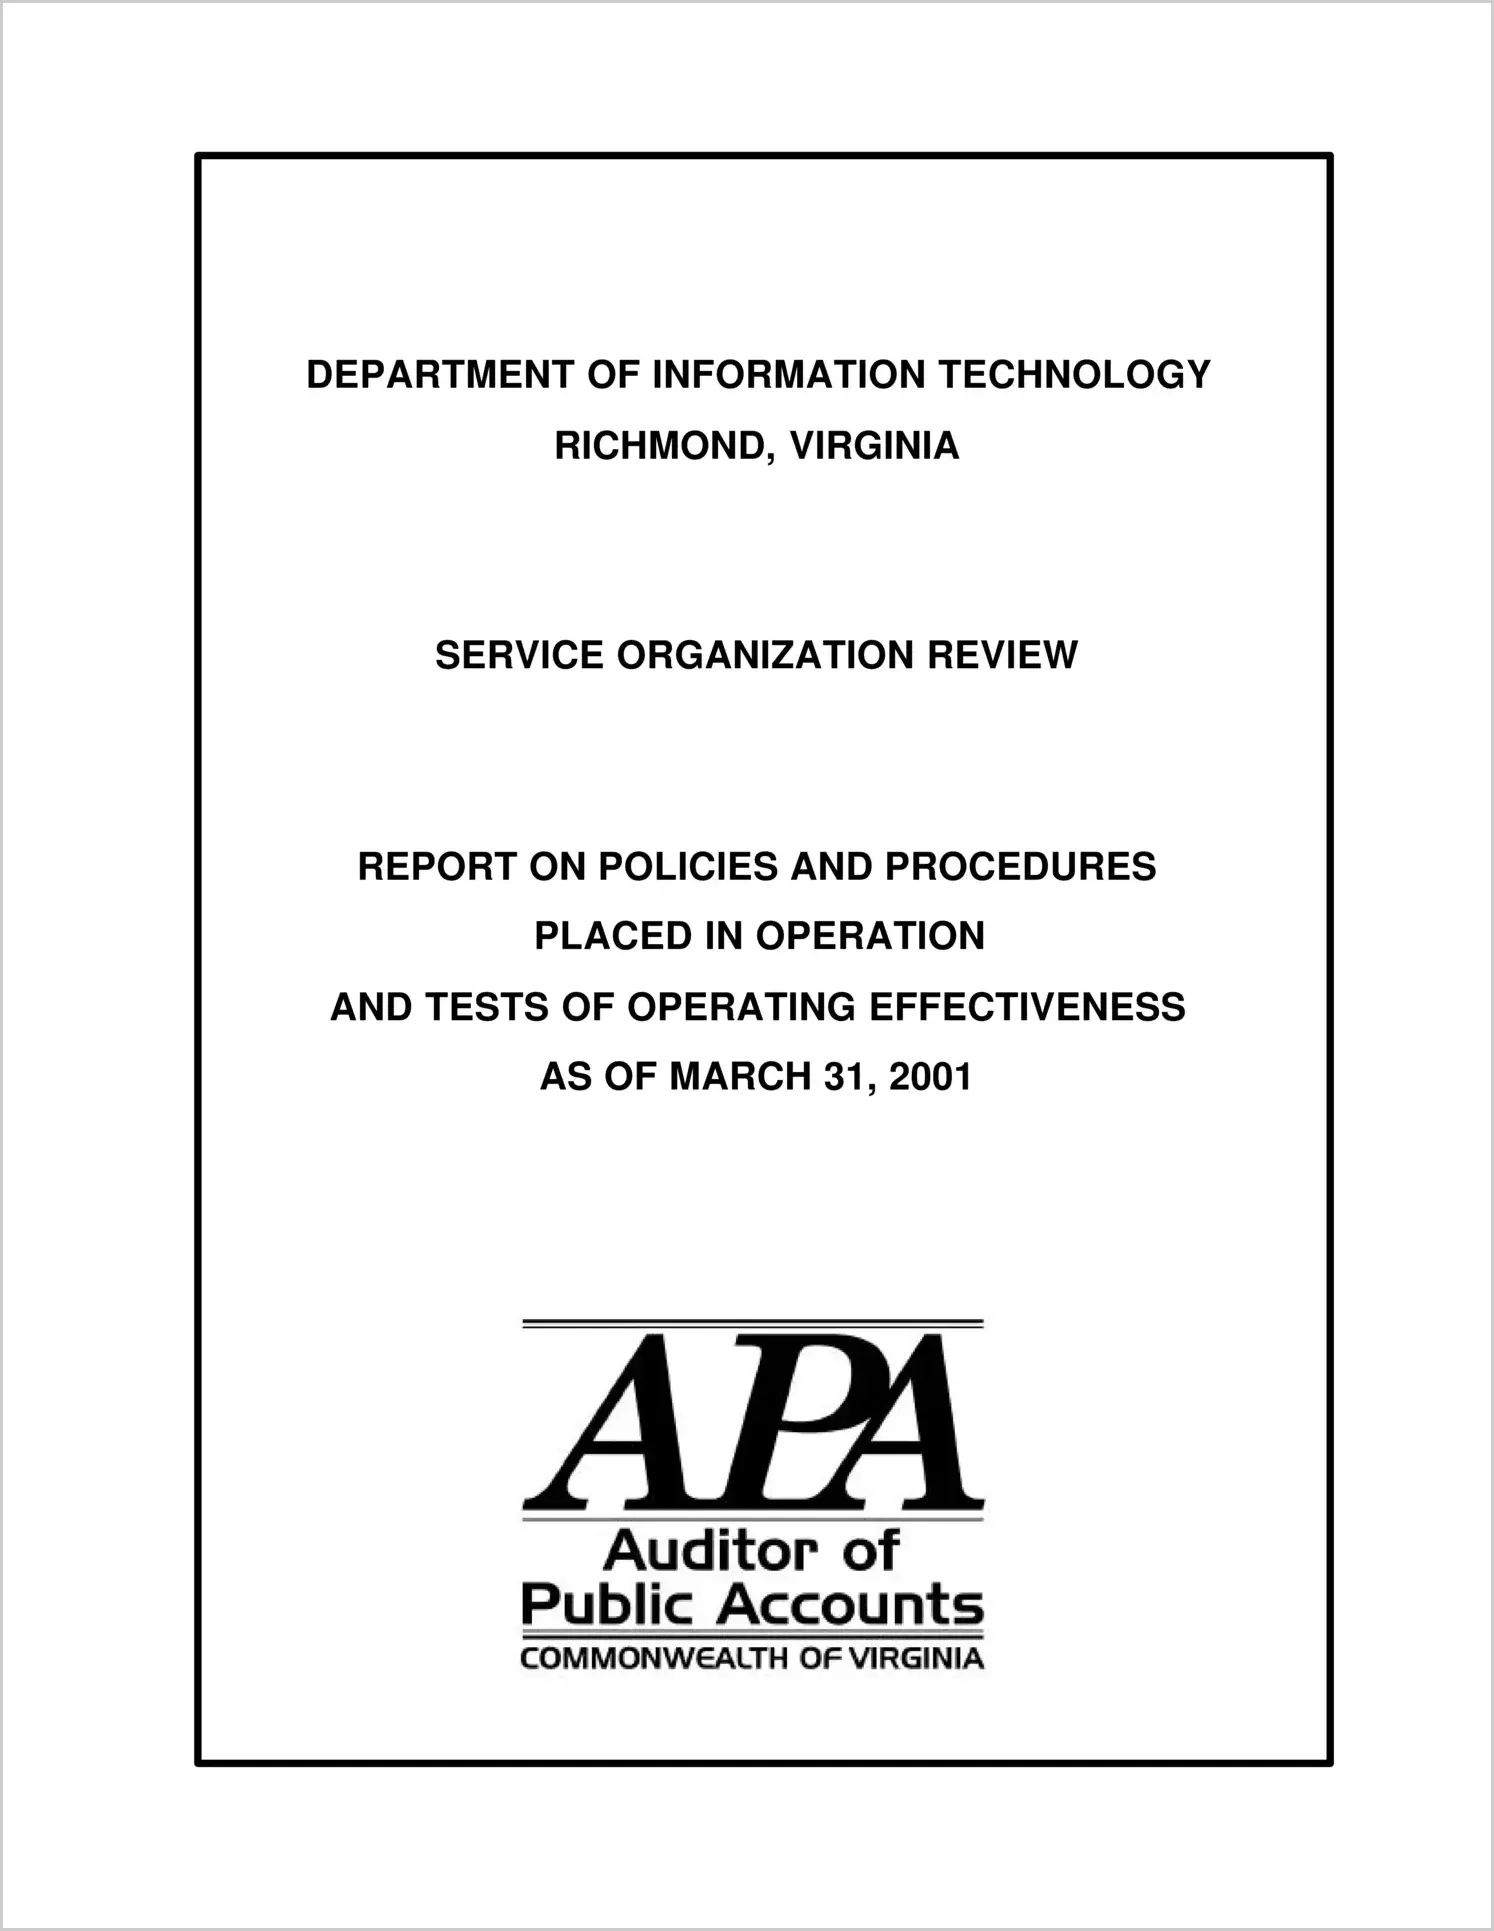 Special ReportDepartment of Information Technology, Service Organization Review, Report on Policies and Procedures Placed in Operation and Tests of Operating Effectiveness as of March 31, 2001(Report Date: 3/31/2001)